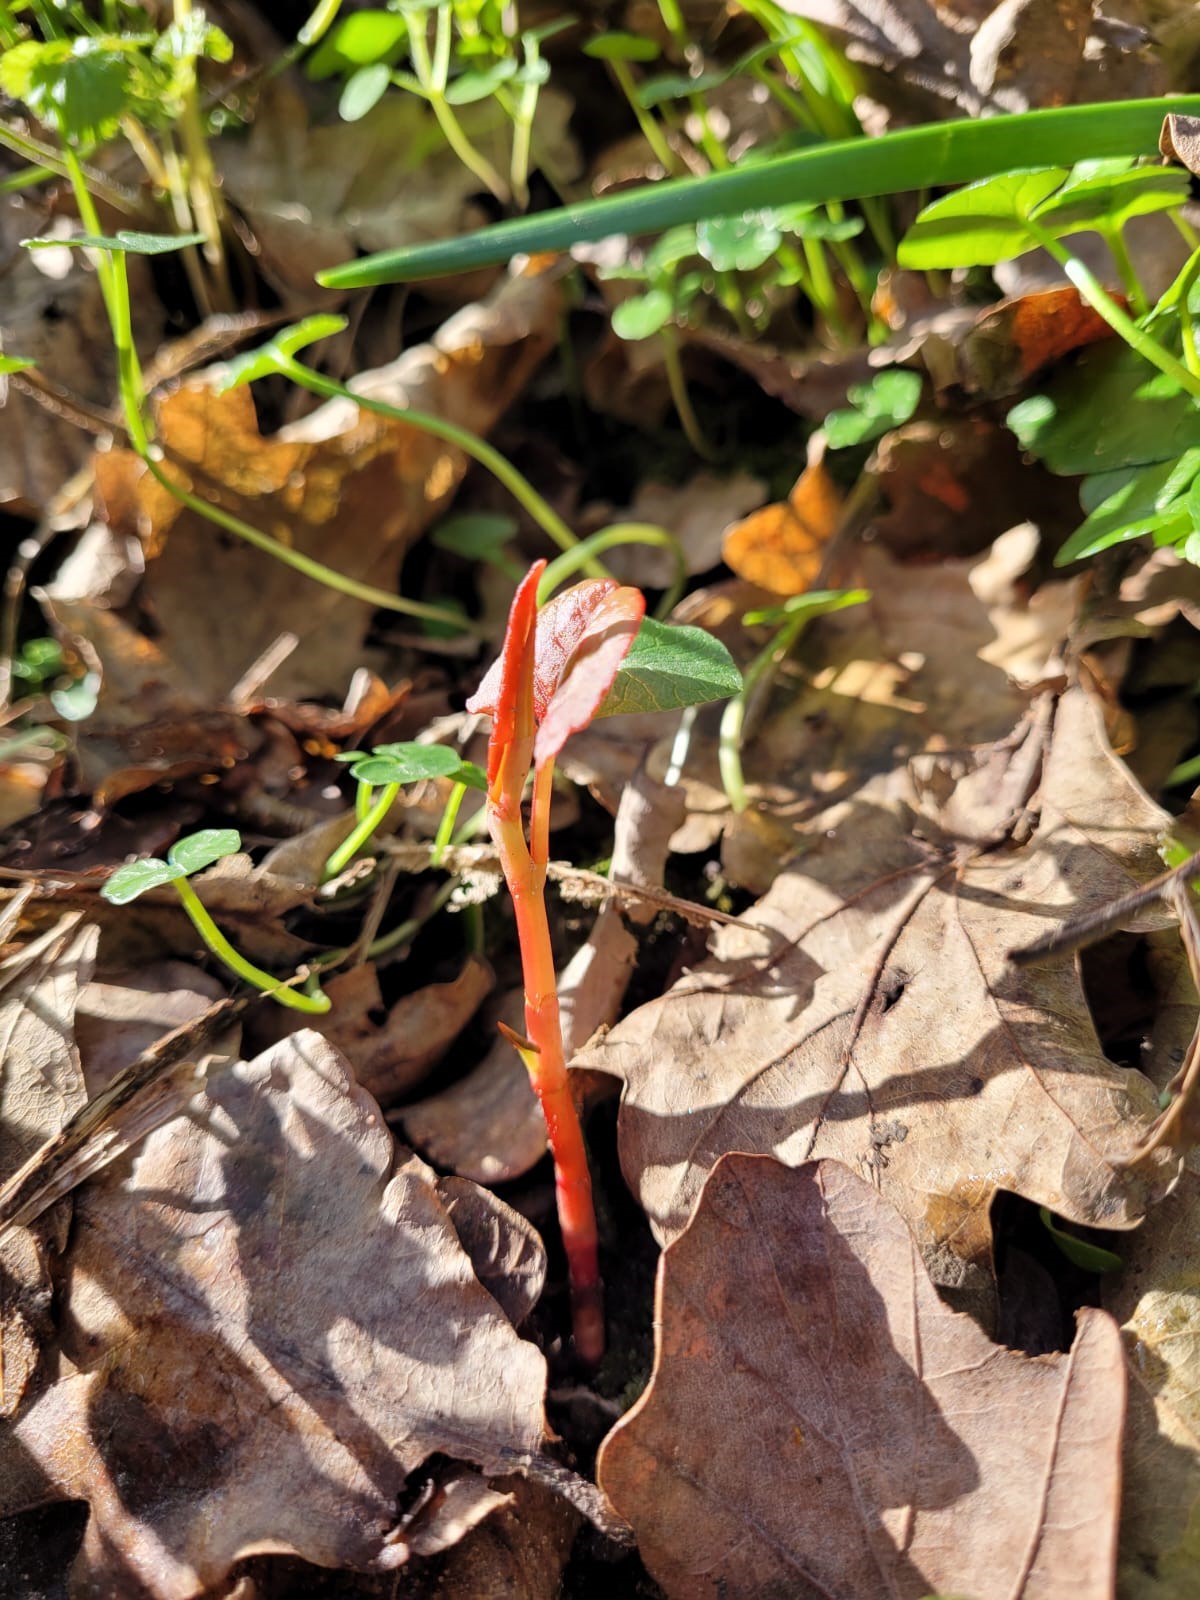 First Japanese knotweed shoots of 2022 spotted in Plymouth